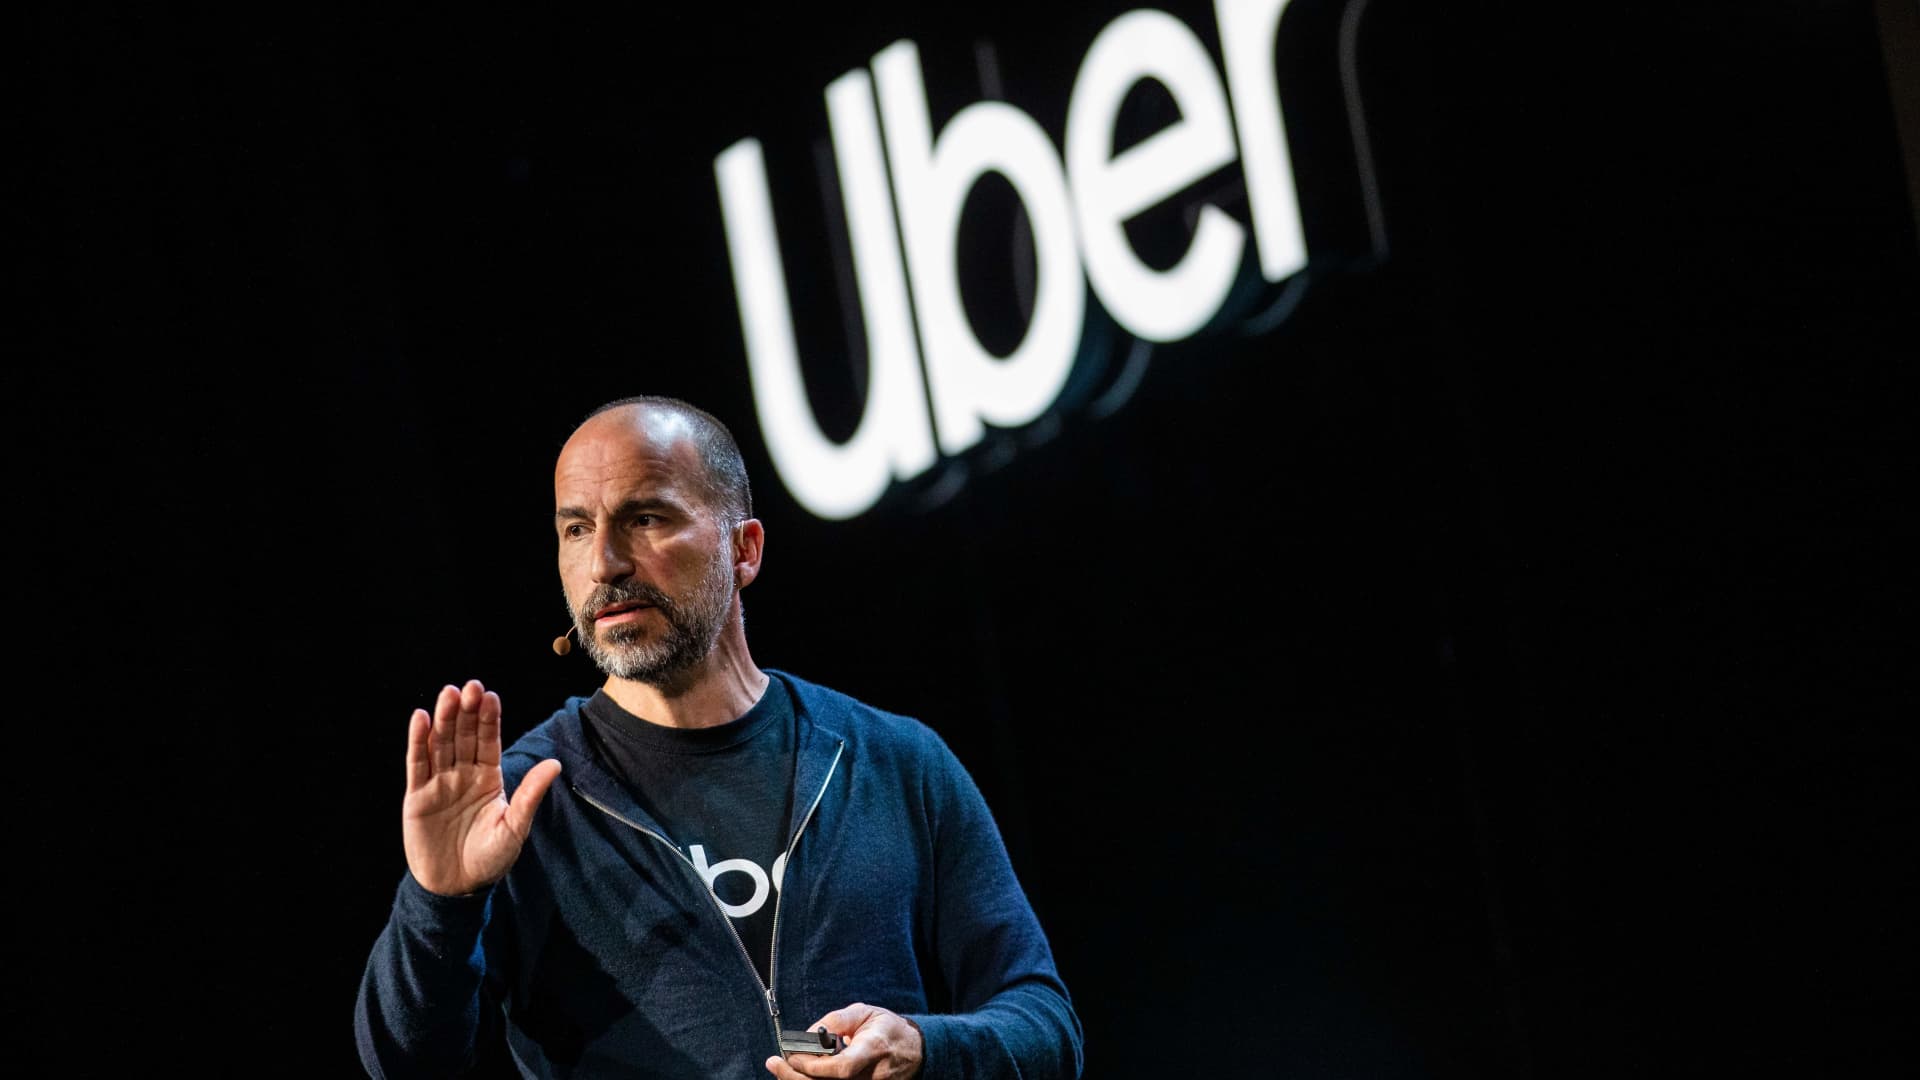 Uber looks to create travel ‘superapp’ by adding planes, trains and rental cars